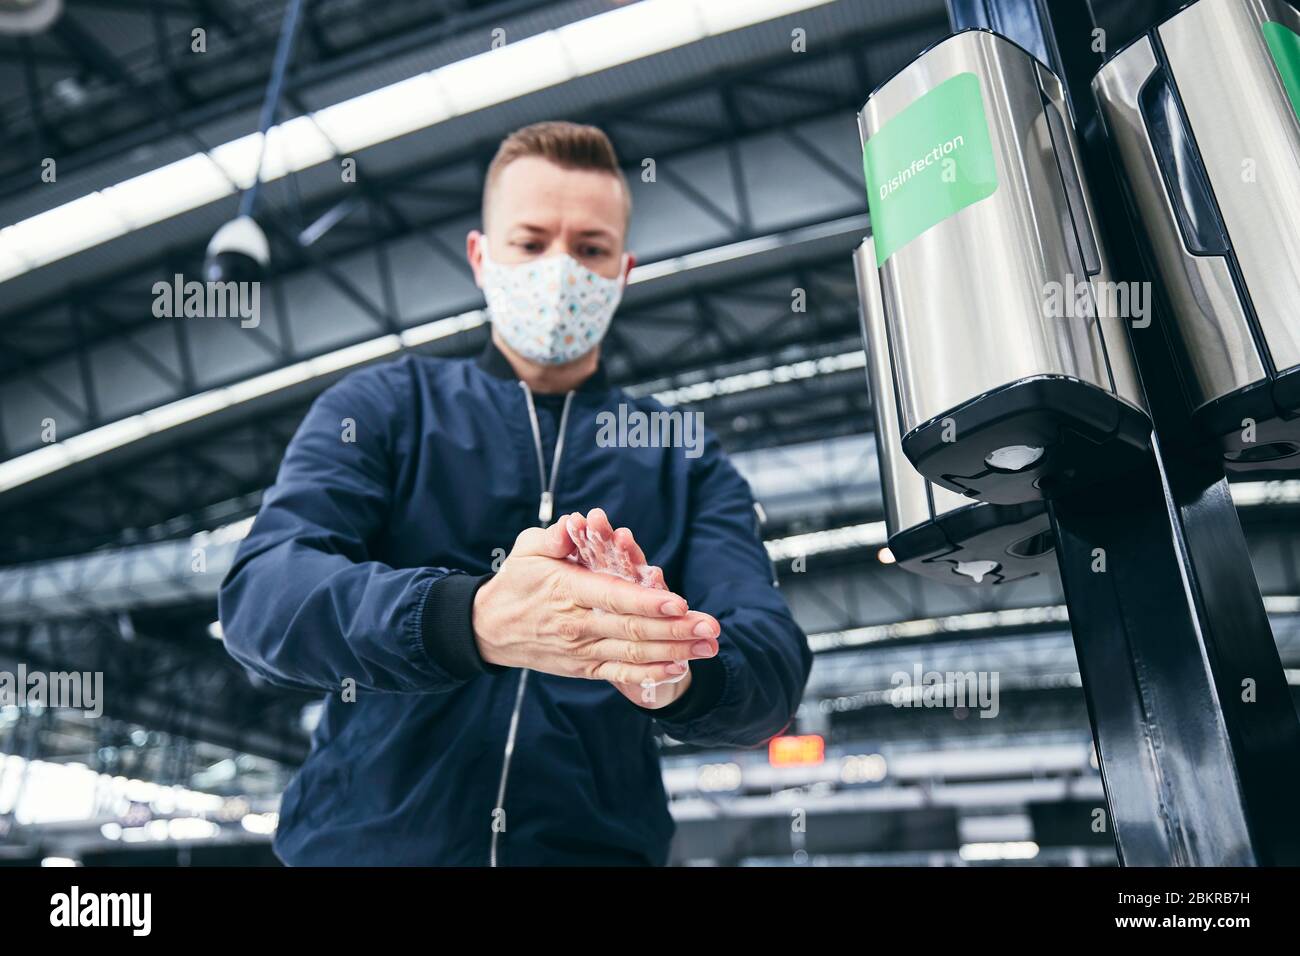 Man wearing face mask and using hand sanitizer at airport. Themes traveling during pandemic, hygiene and personal protection. Stock Photo